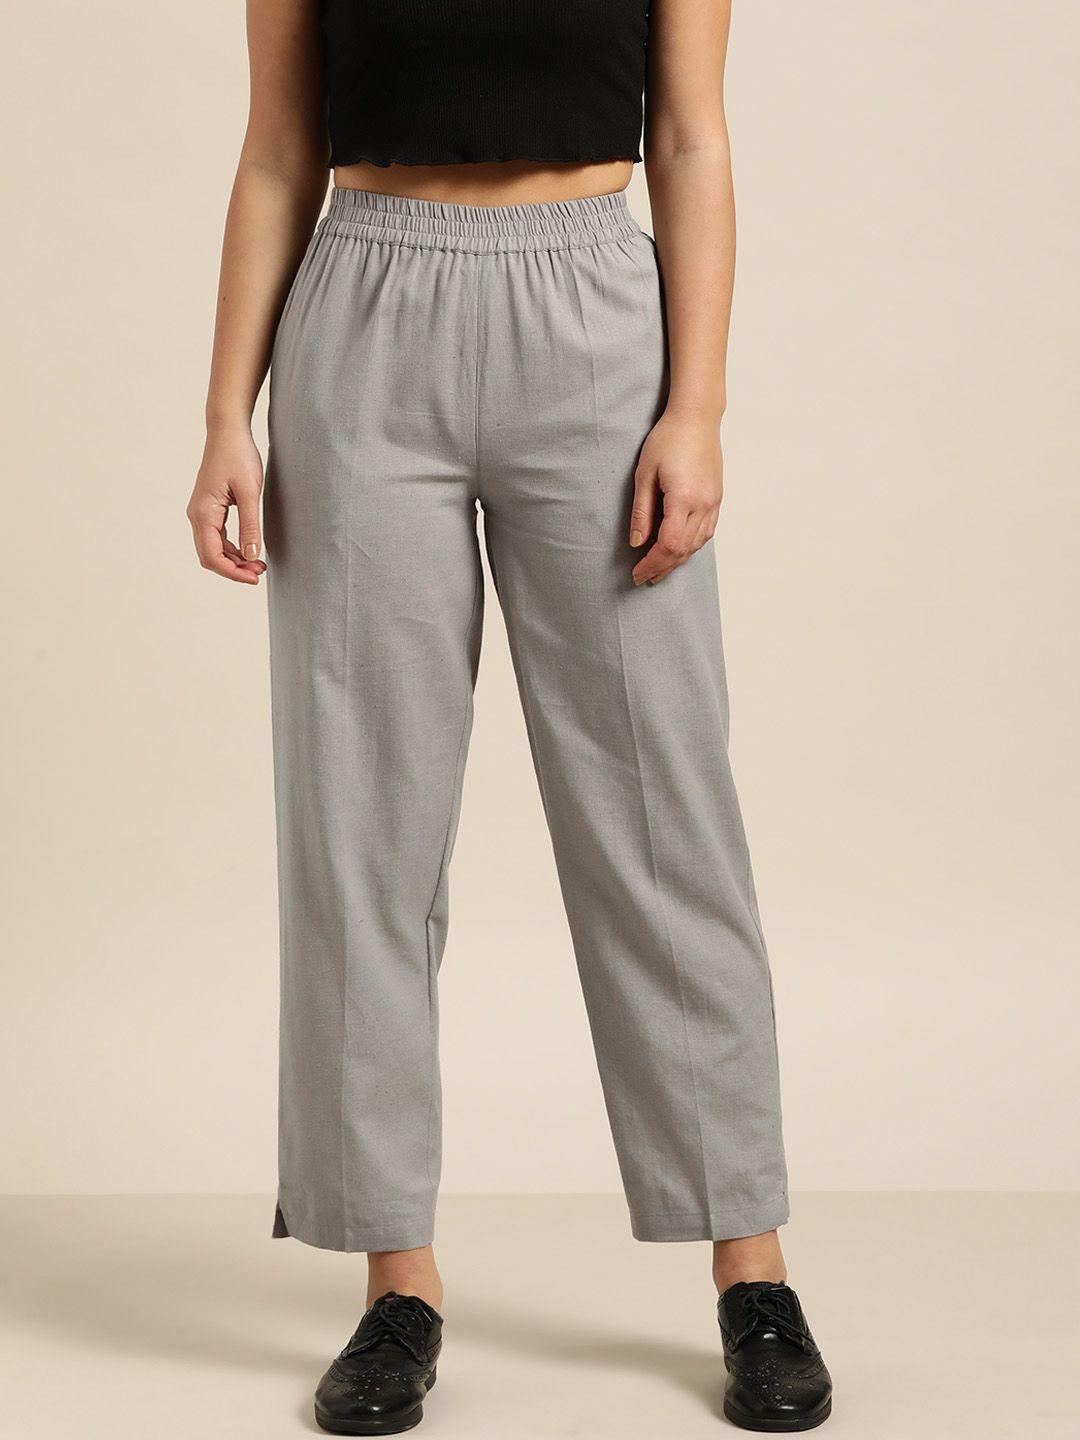 shae-by-sassafras-women-grey-straight-fit-trousers